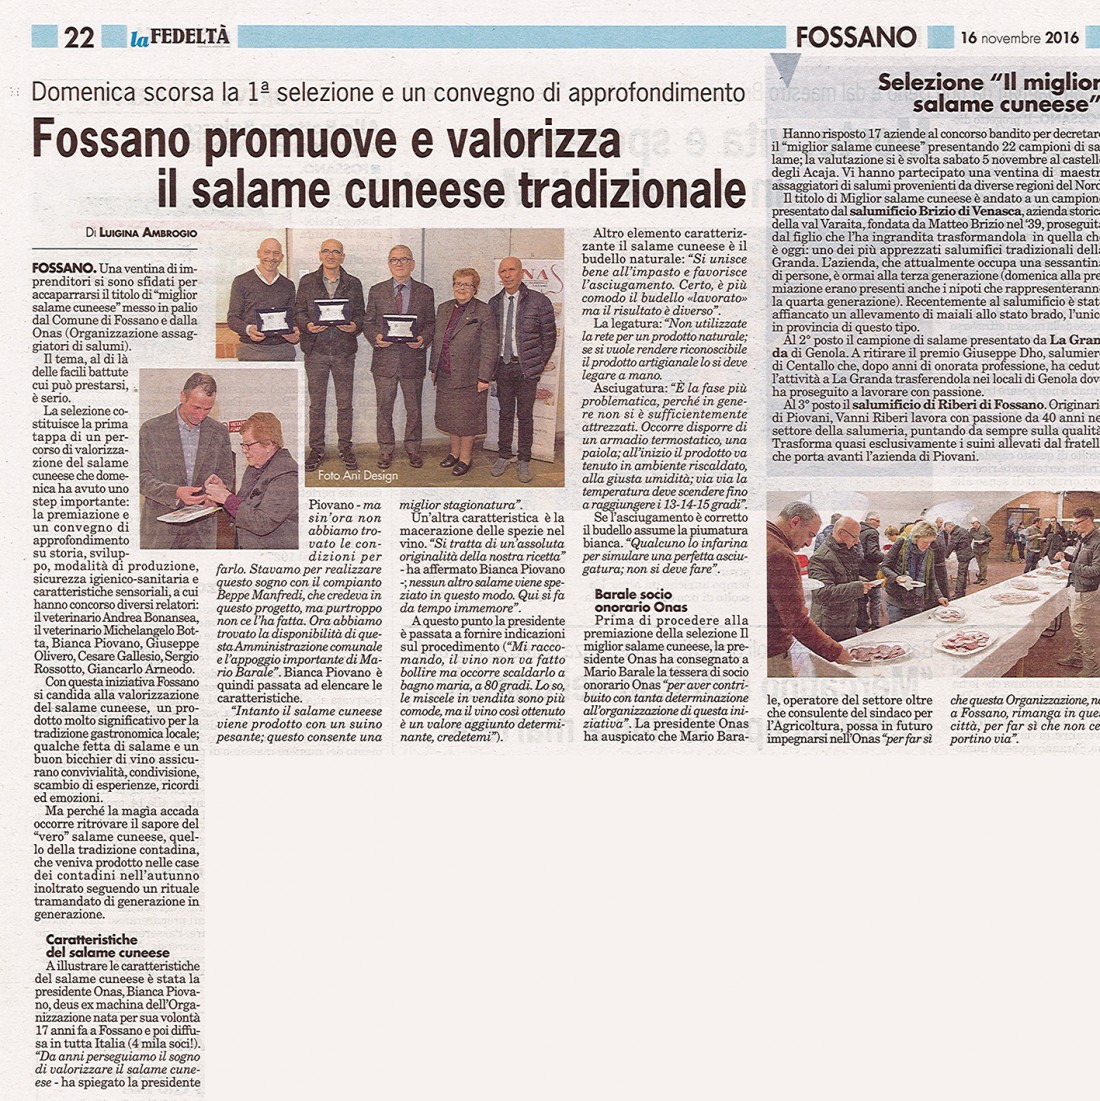 Fossano - Salame cuneese tradizionale